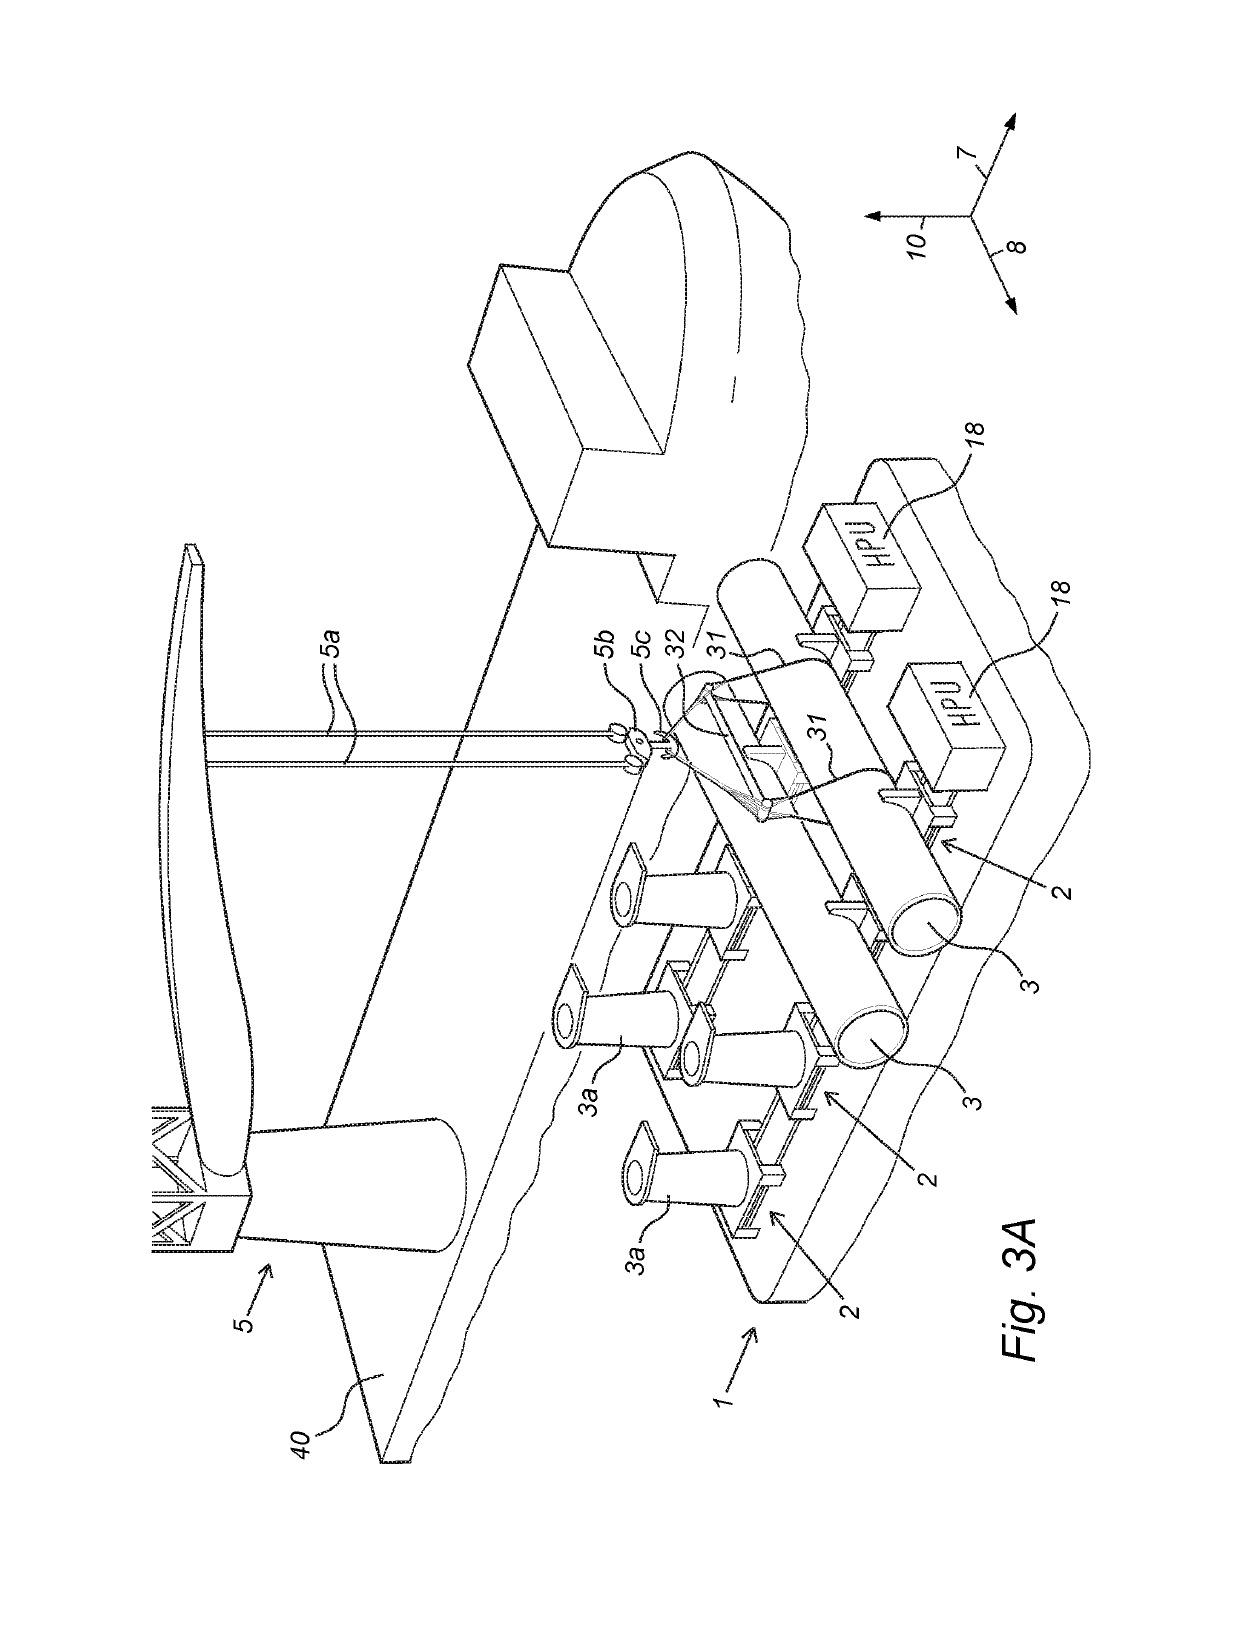 Device and method for lifting an object from a deck of a vessel subject to movements